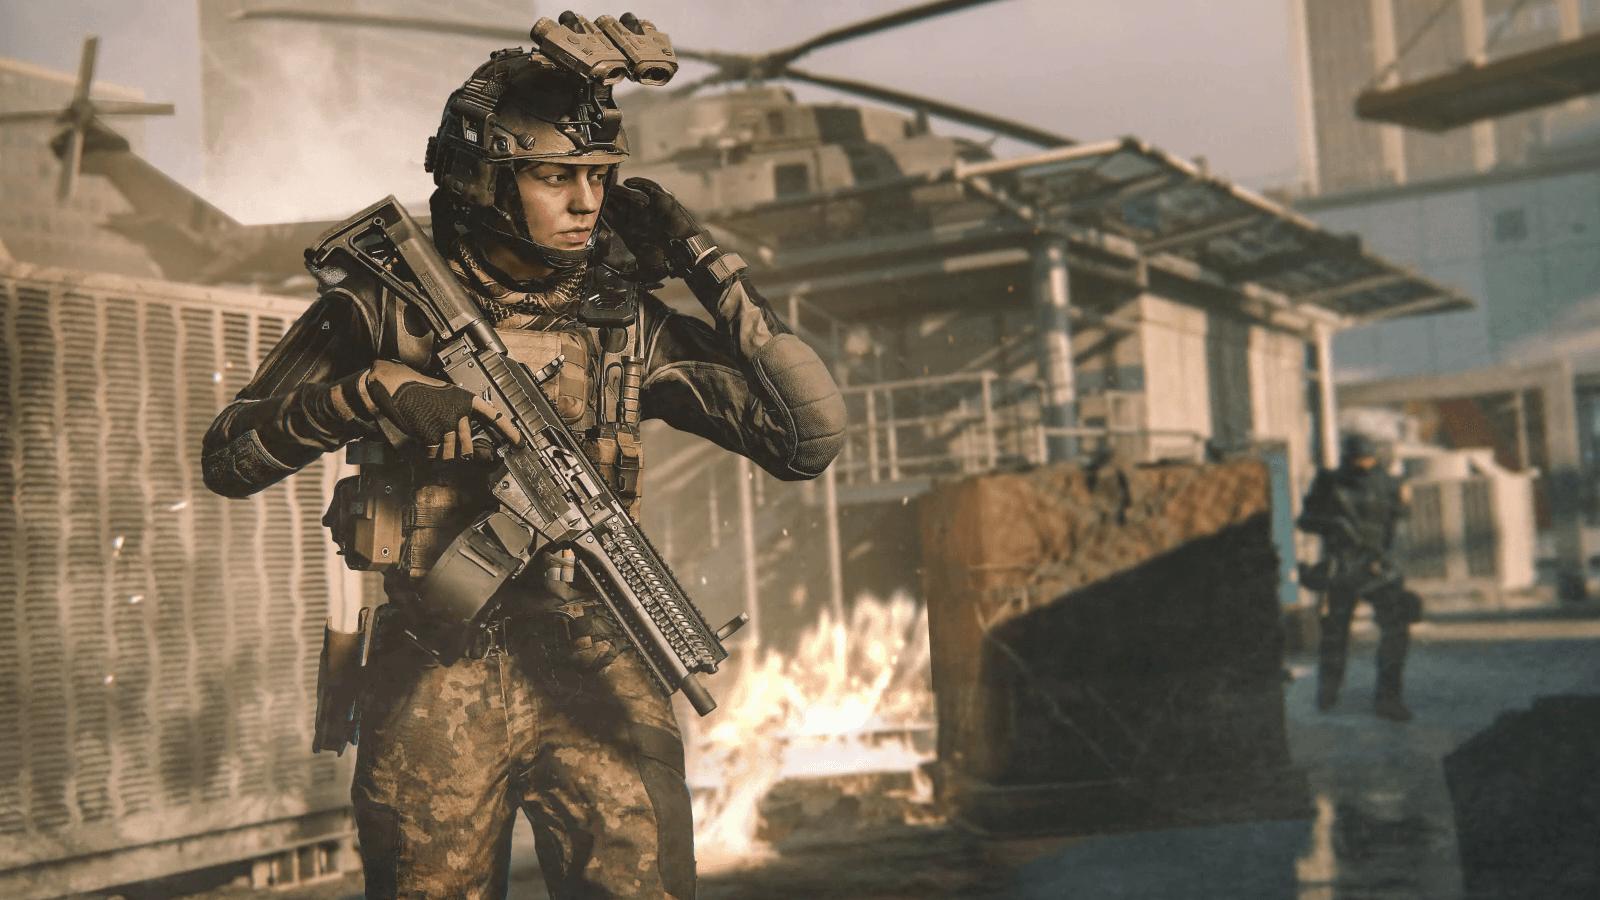 CoD: Modern Warfare 3 Faces Bad Reviews After Rushed Development